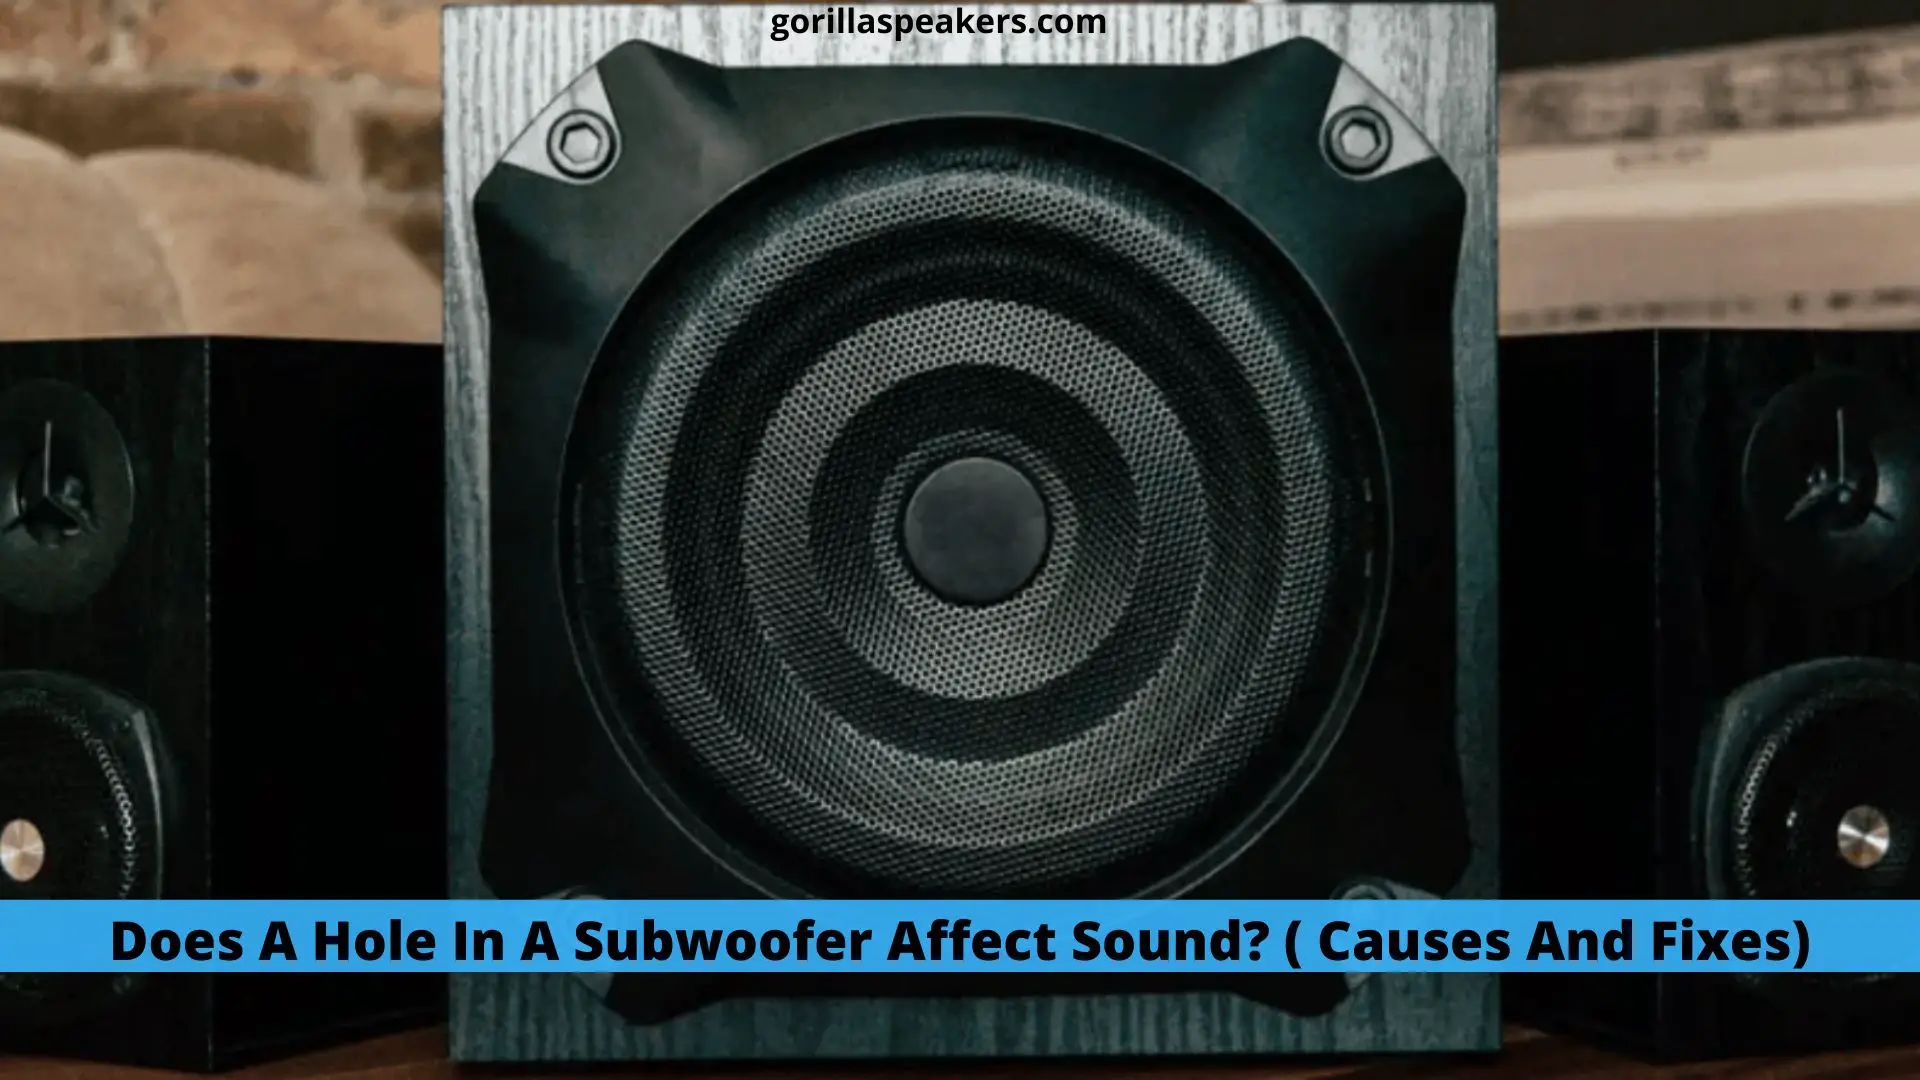 Does A Hole In A Subwoofer Affect Sound?